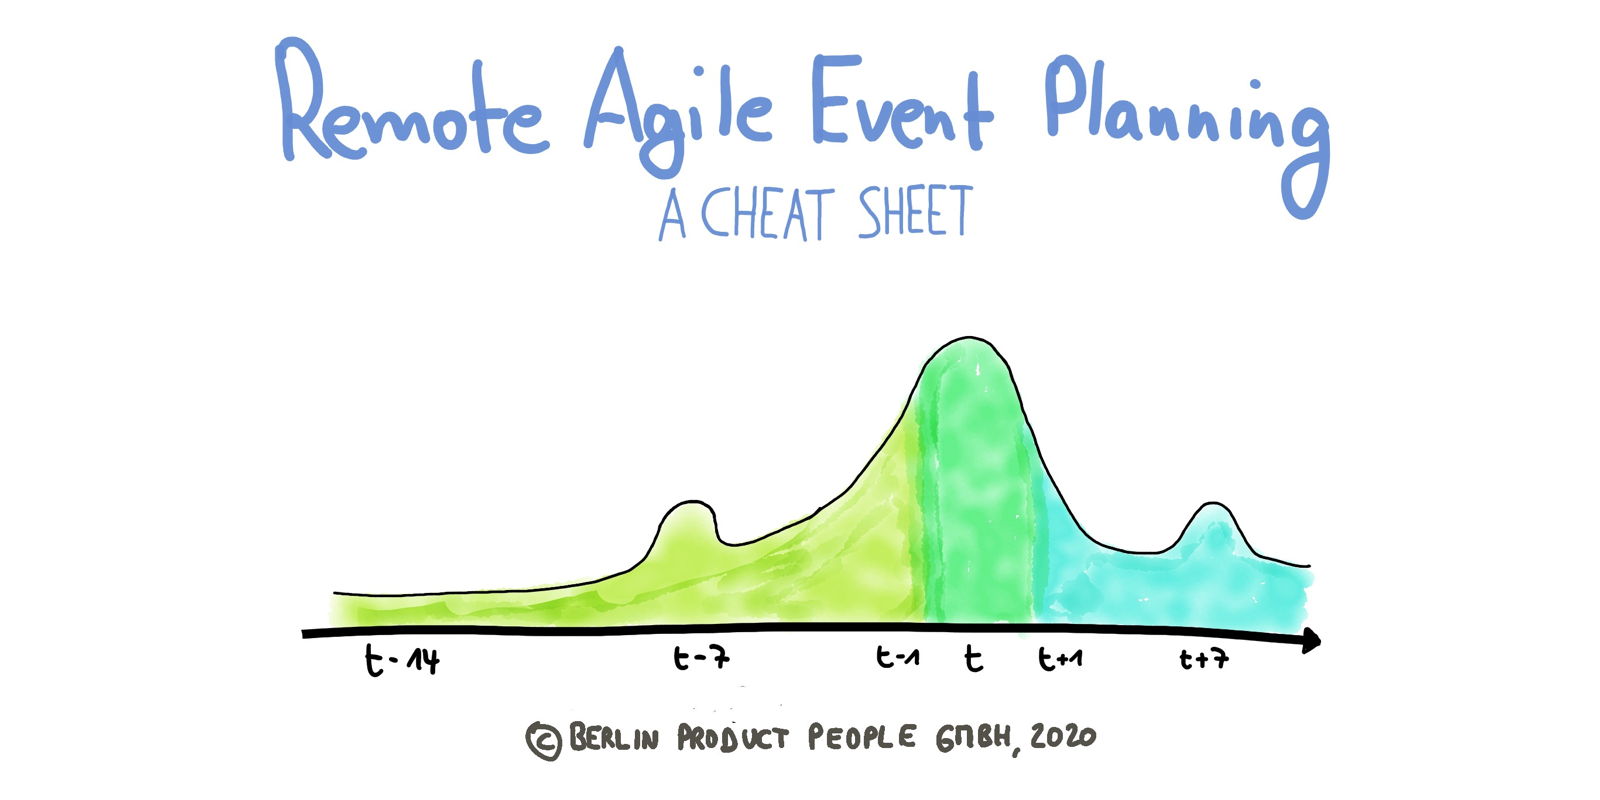 Remote Agile (9): A Cheat Sheet for Remote Agile Event Planning — Berlin Product People GmbH